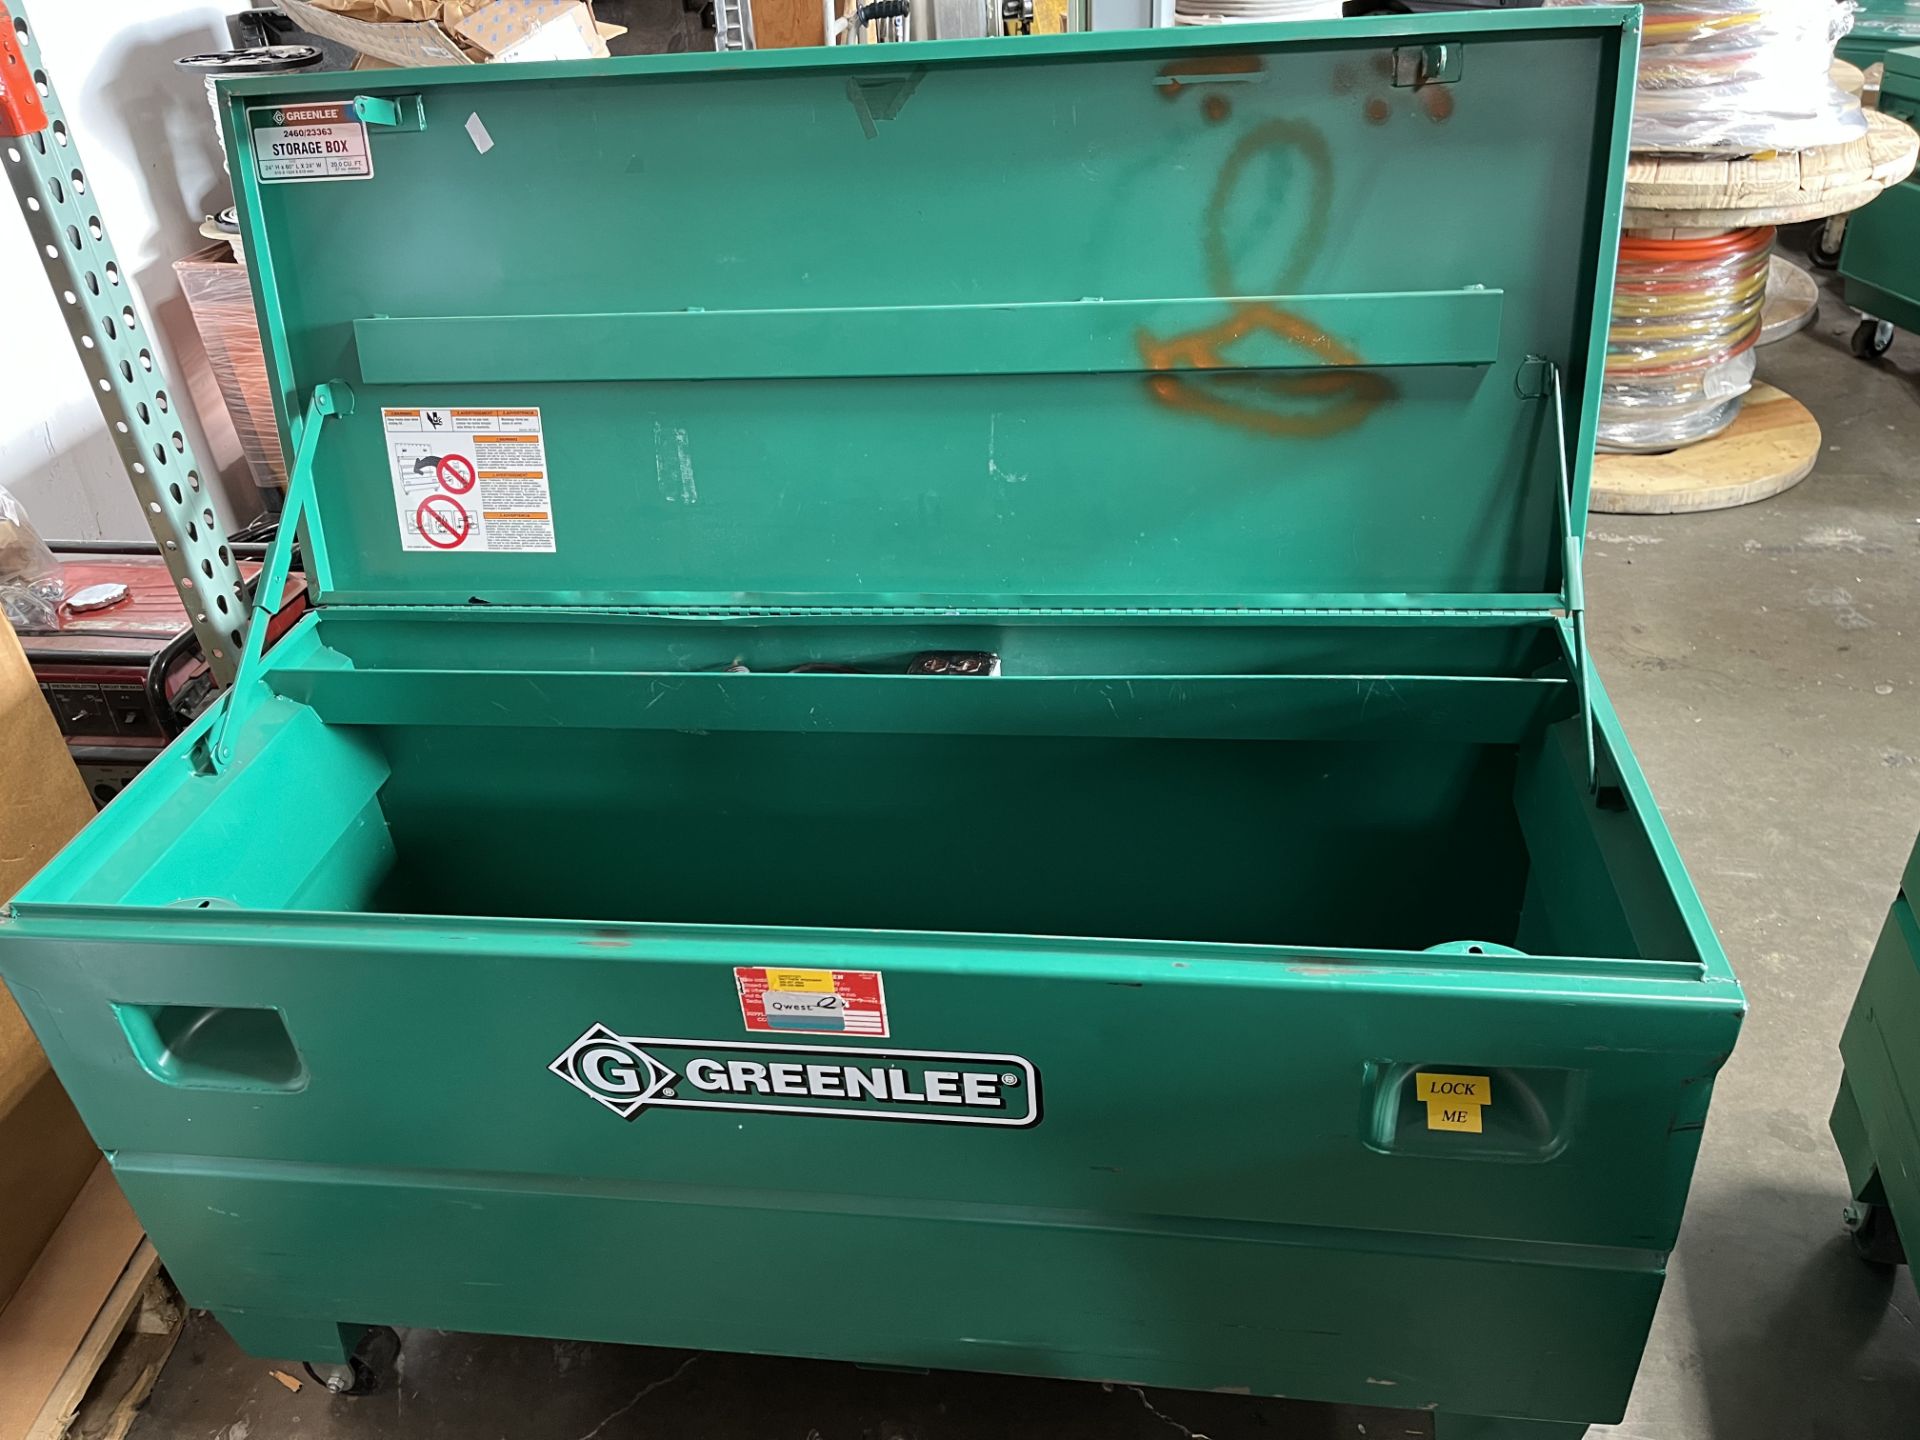 Greenlee 24" X 60" X 24" Job Box on casters Model 2460/23363 - Image 2 of 2